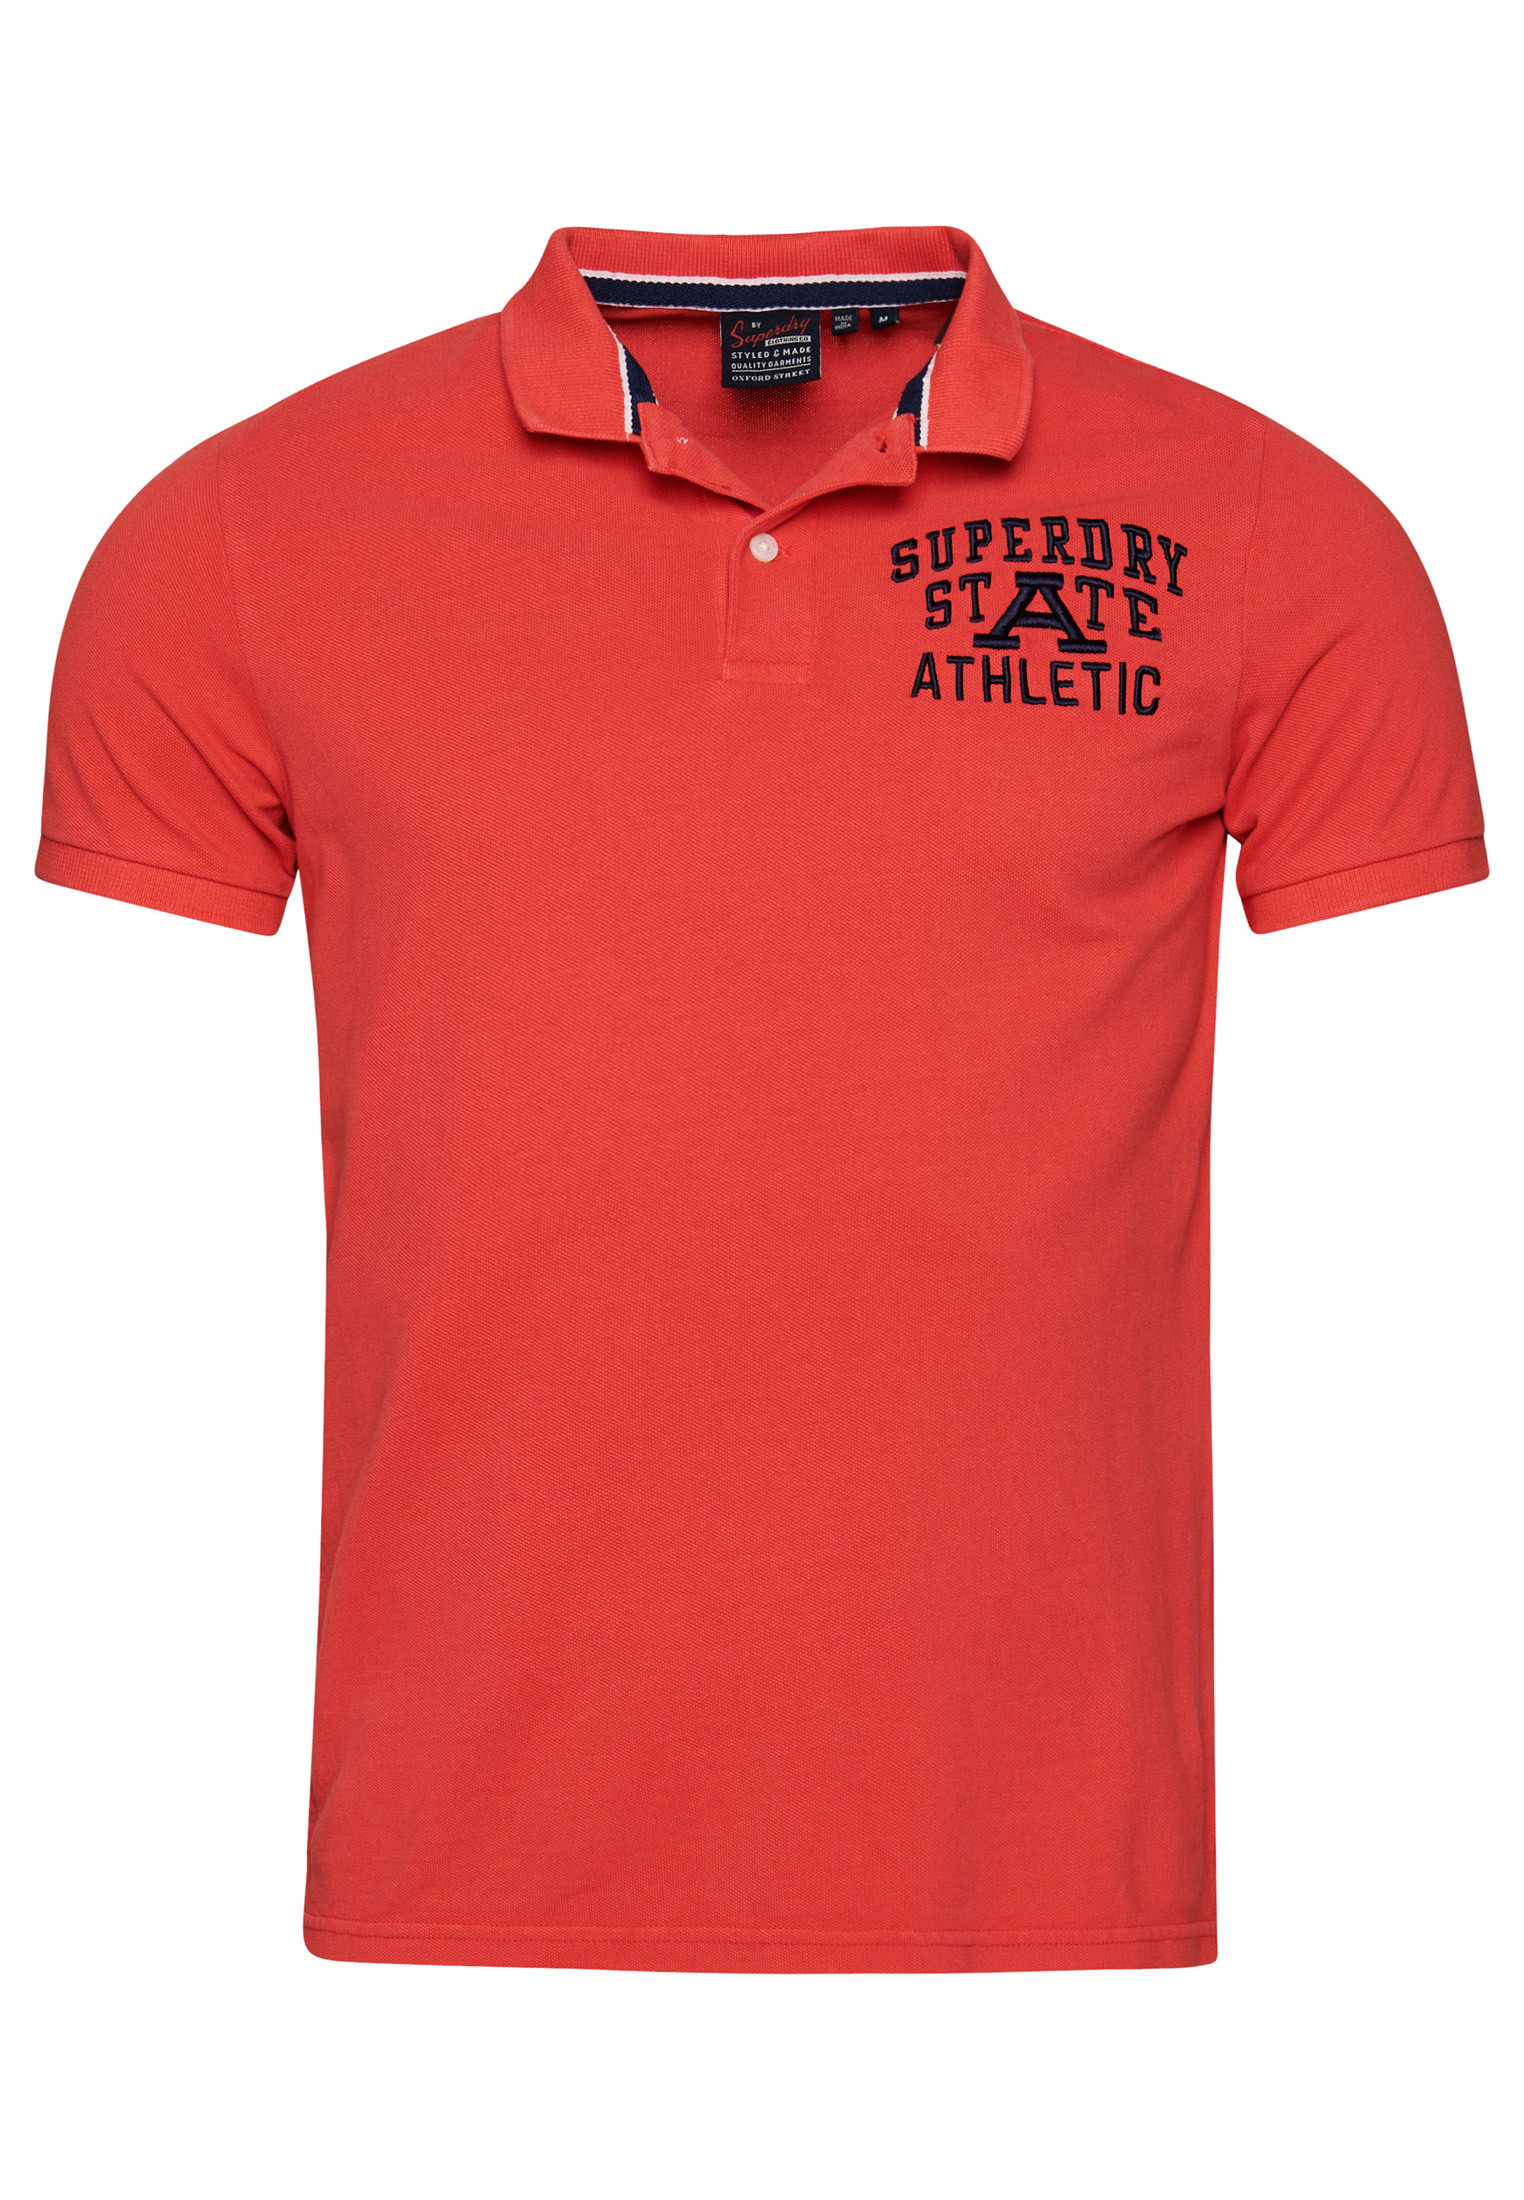 Superdry - Cotton piqué polo shirt with logo, Red, large image number 0